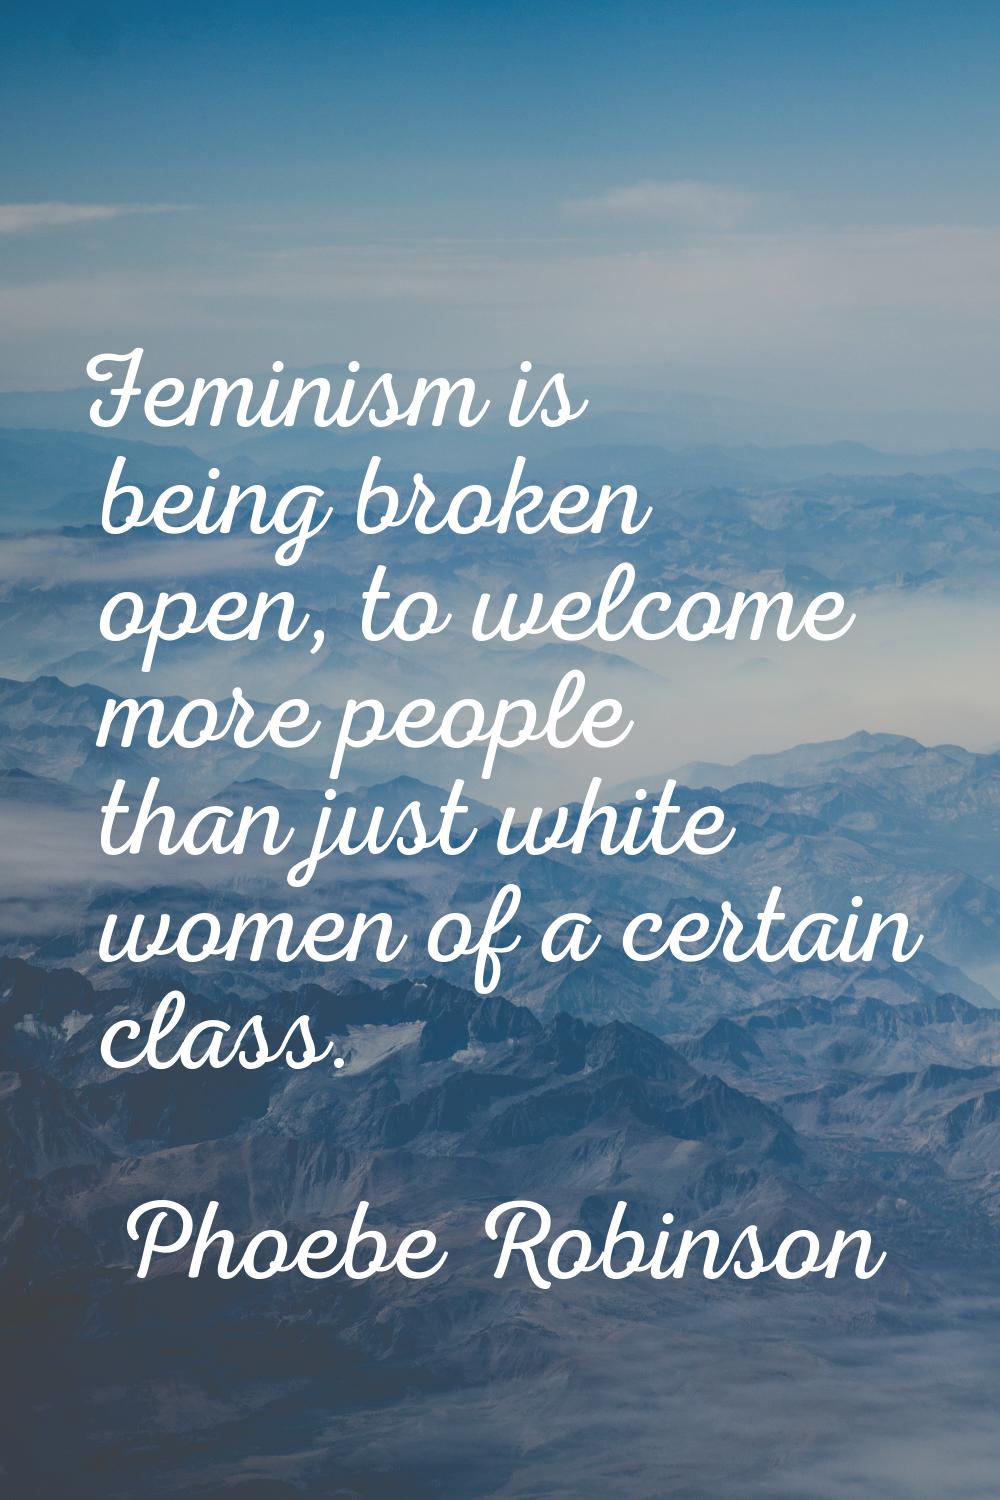 Feminism is being broken open, to welcome more people than just white women of a certain class.